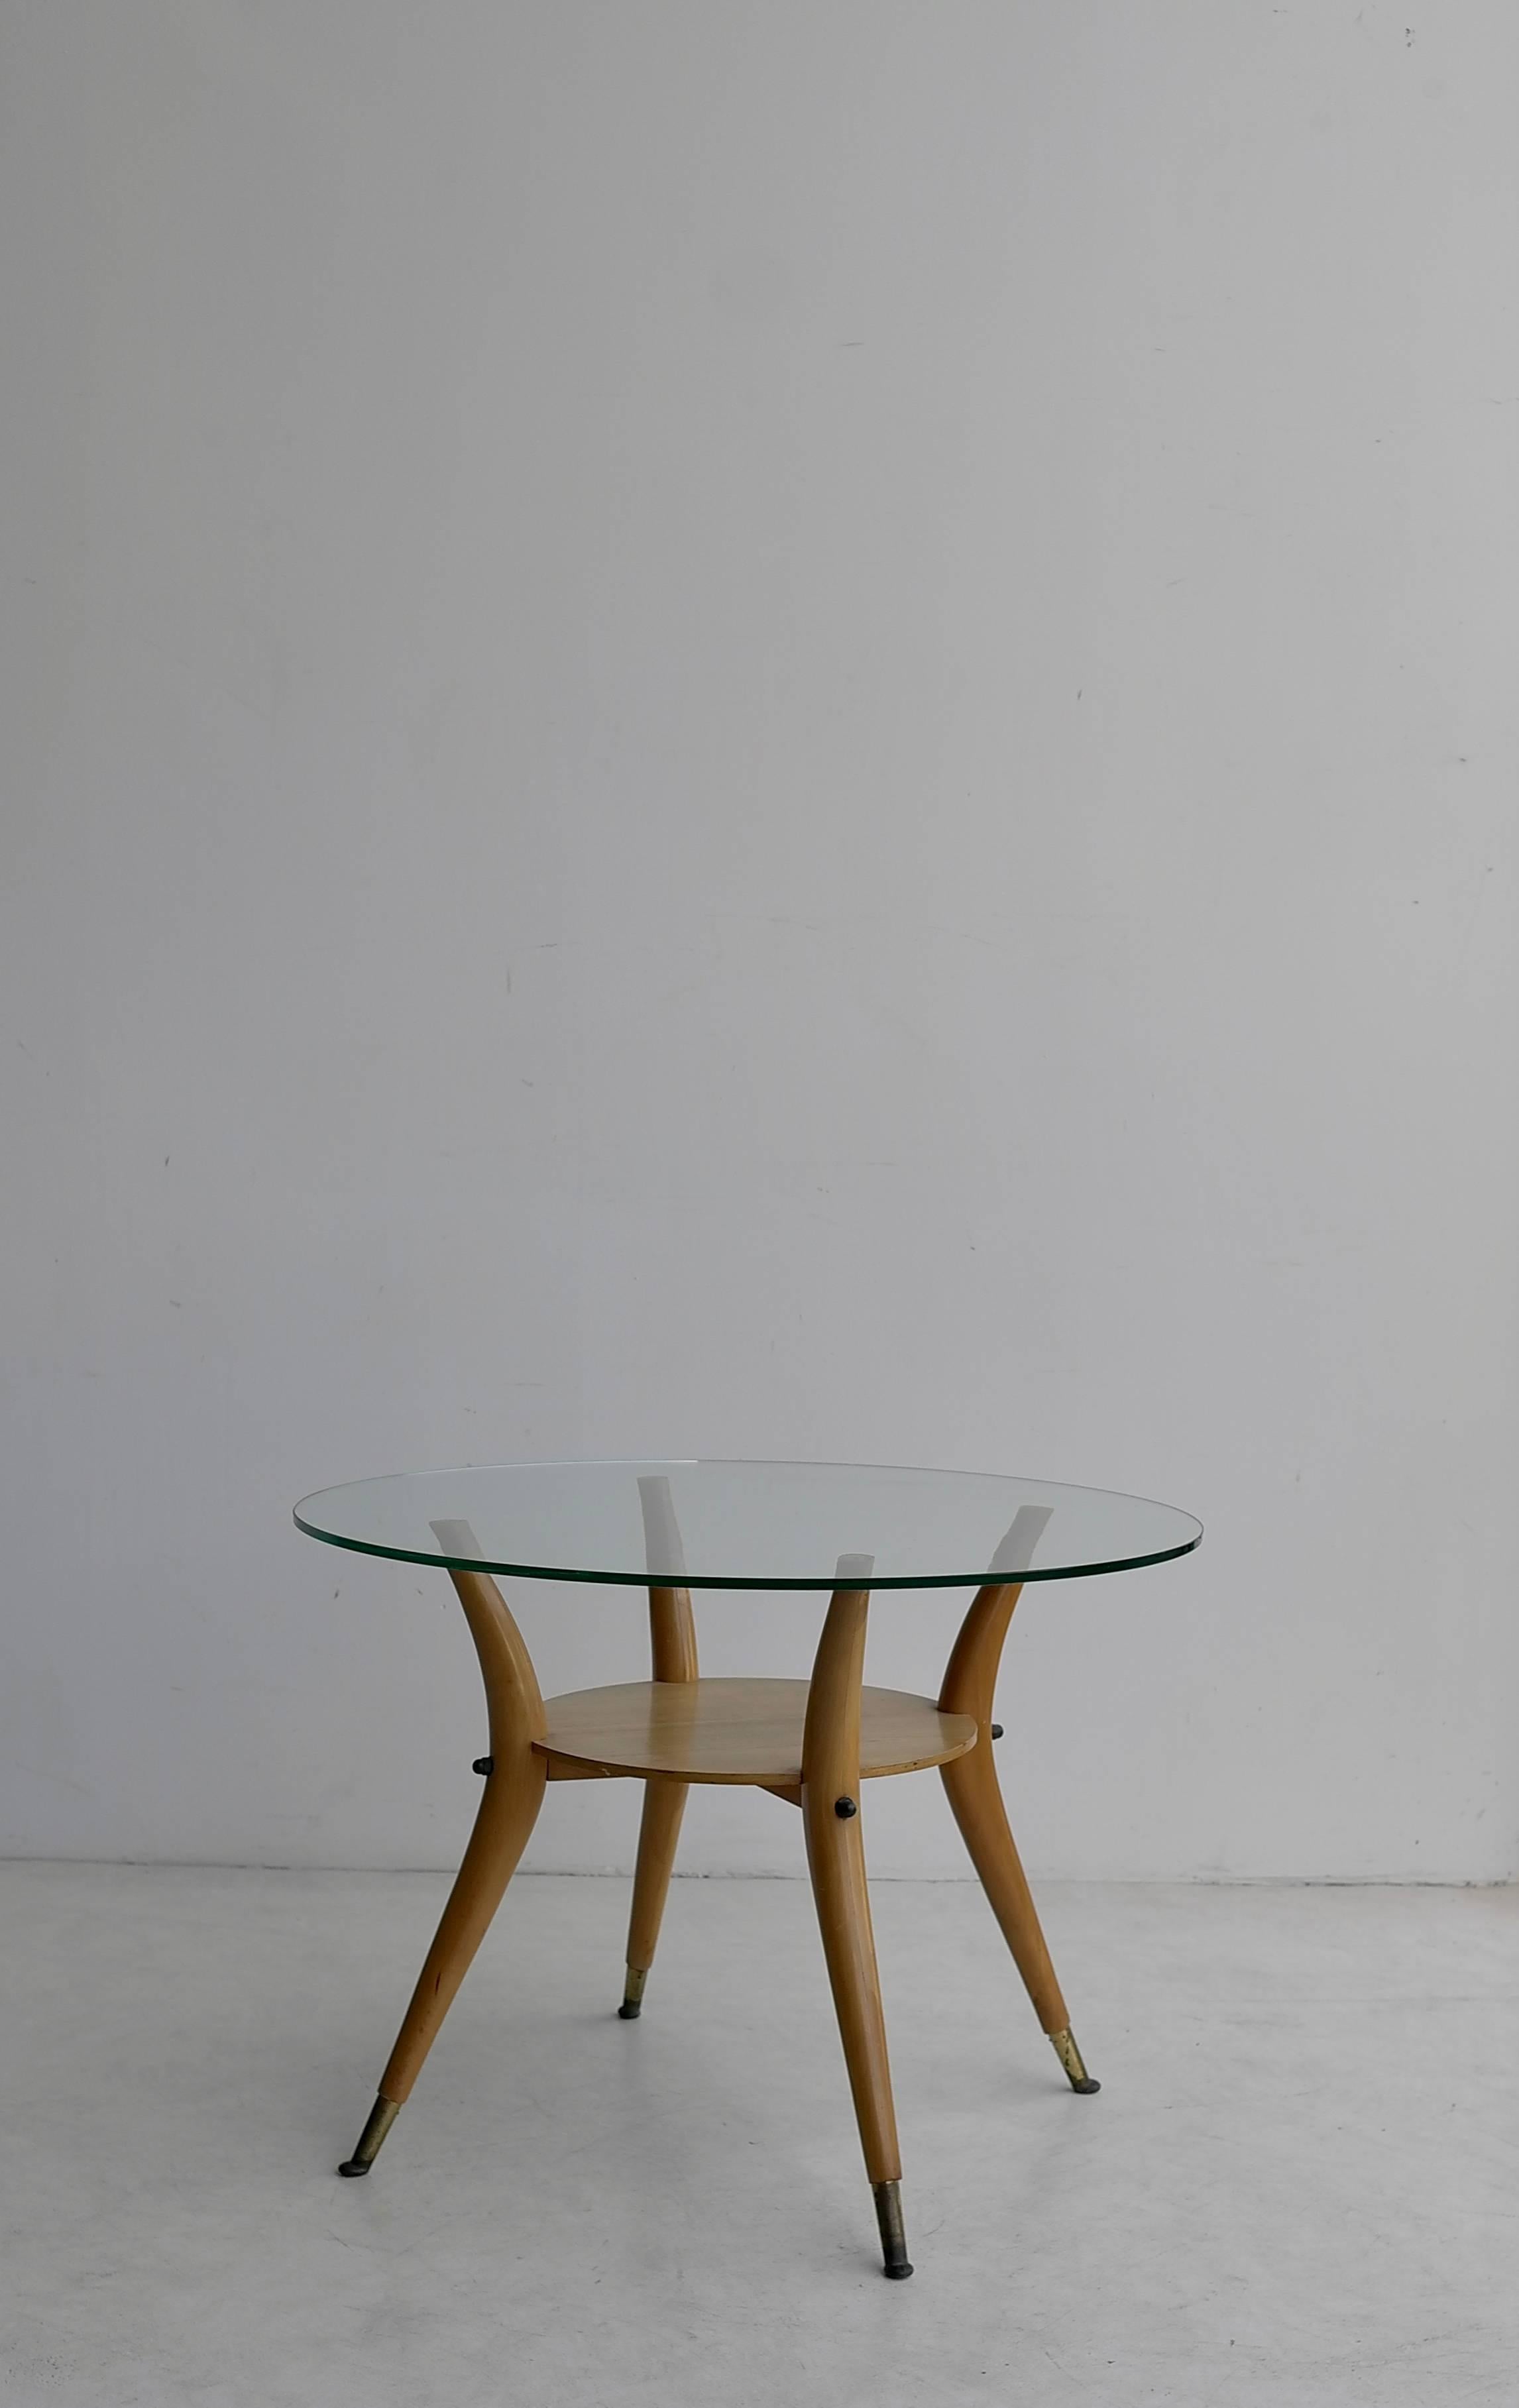 Italian 1950s side table in style of Gio Ponti.